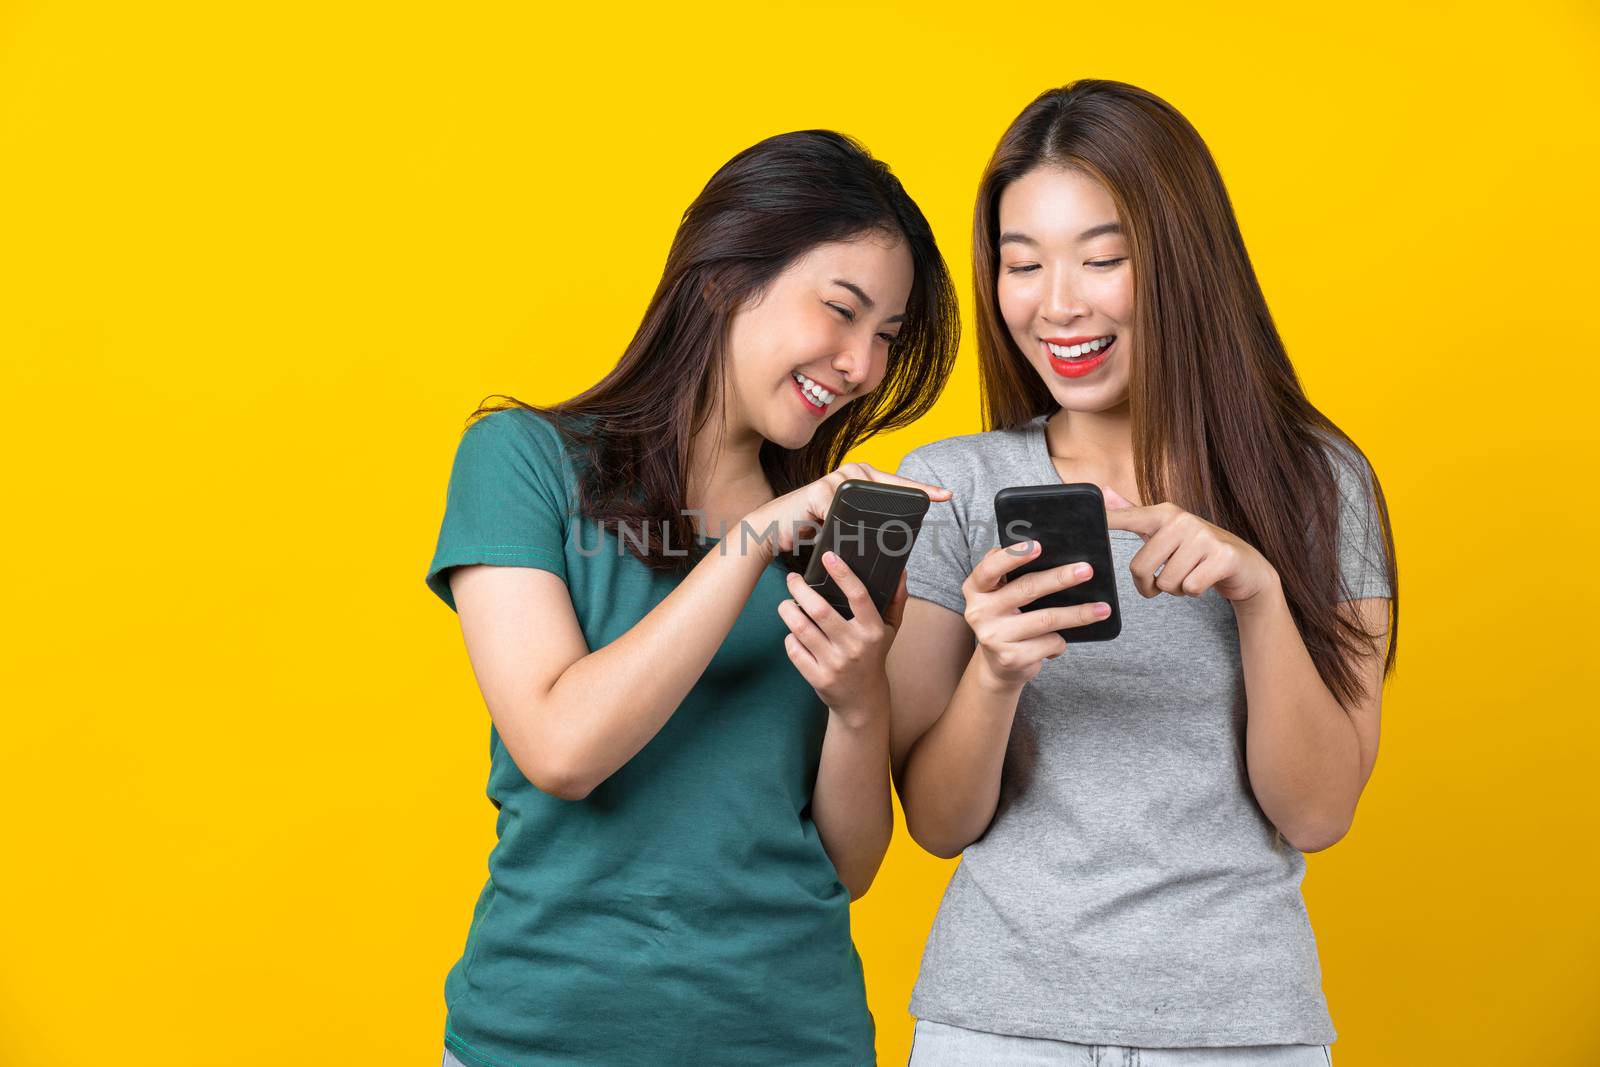 Two Happiness Asian smiling young woman gamer using smart mobile phone and playing games on isolated yellow color background, Lifestyle and leisure with hobby concept